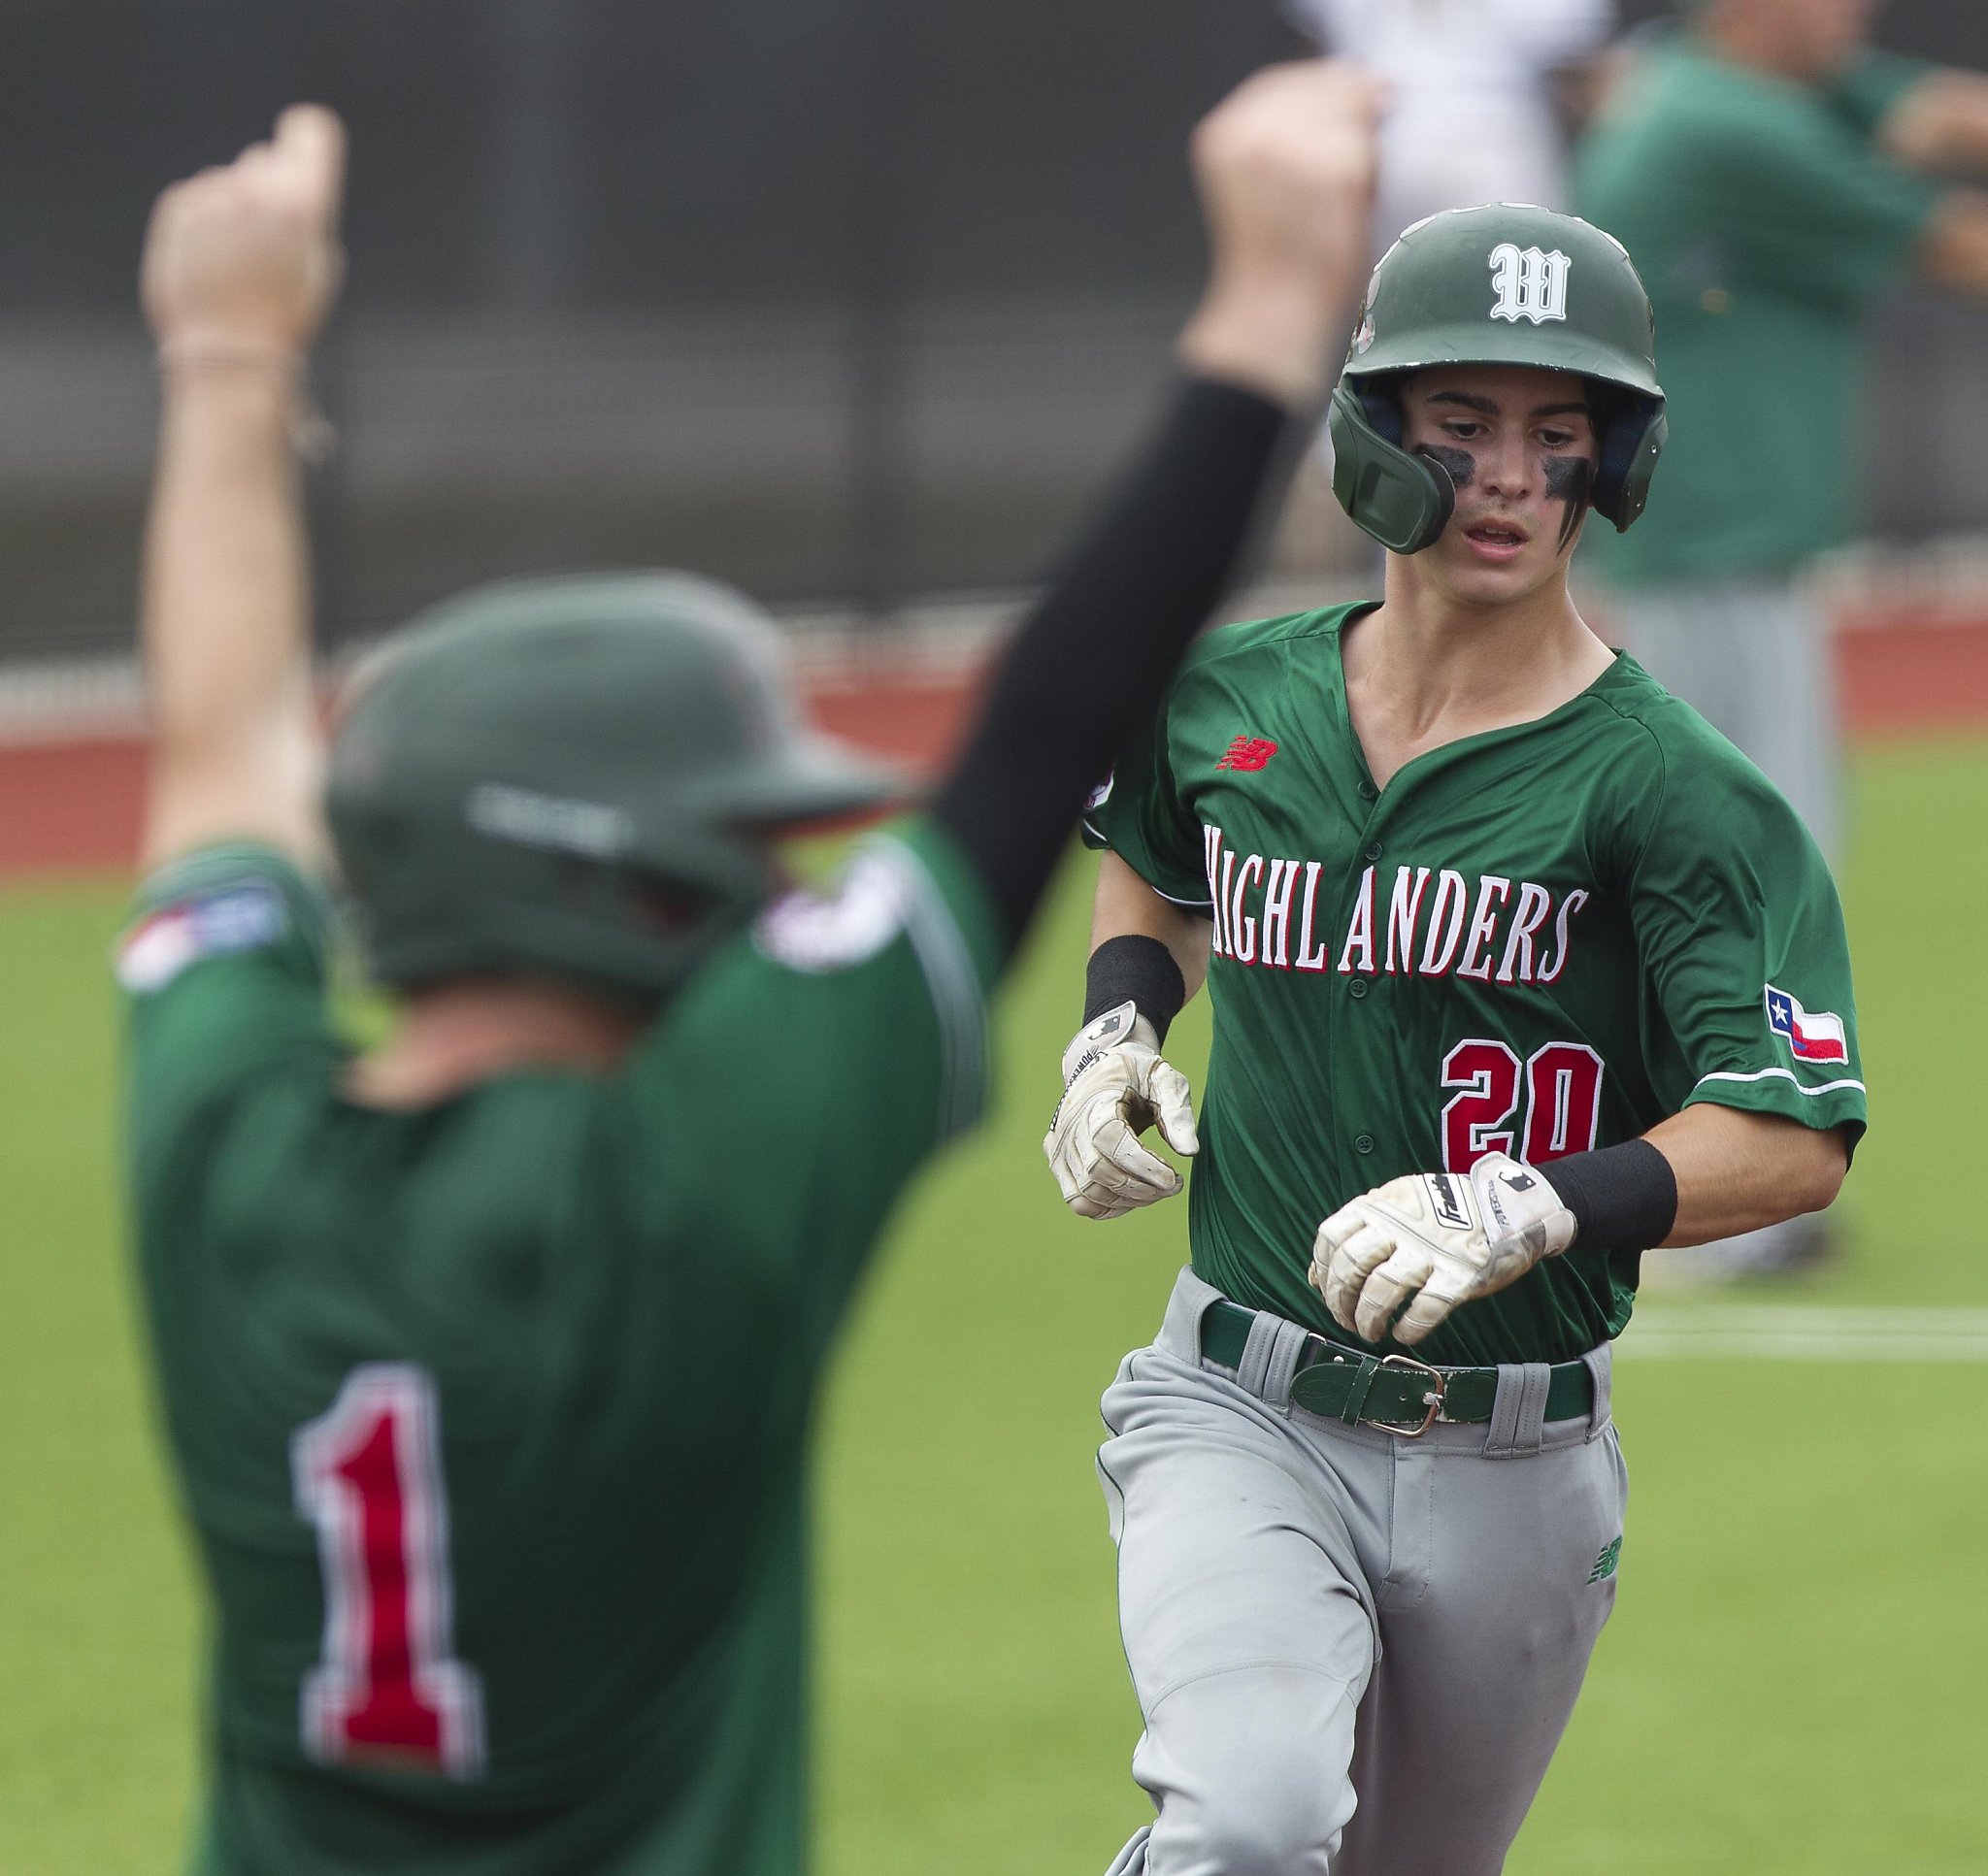 BASEBALL: Caley leads The Woodlands past Cypress Woods